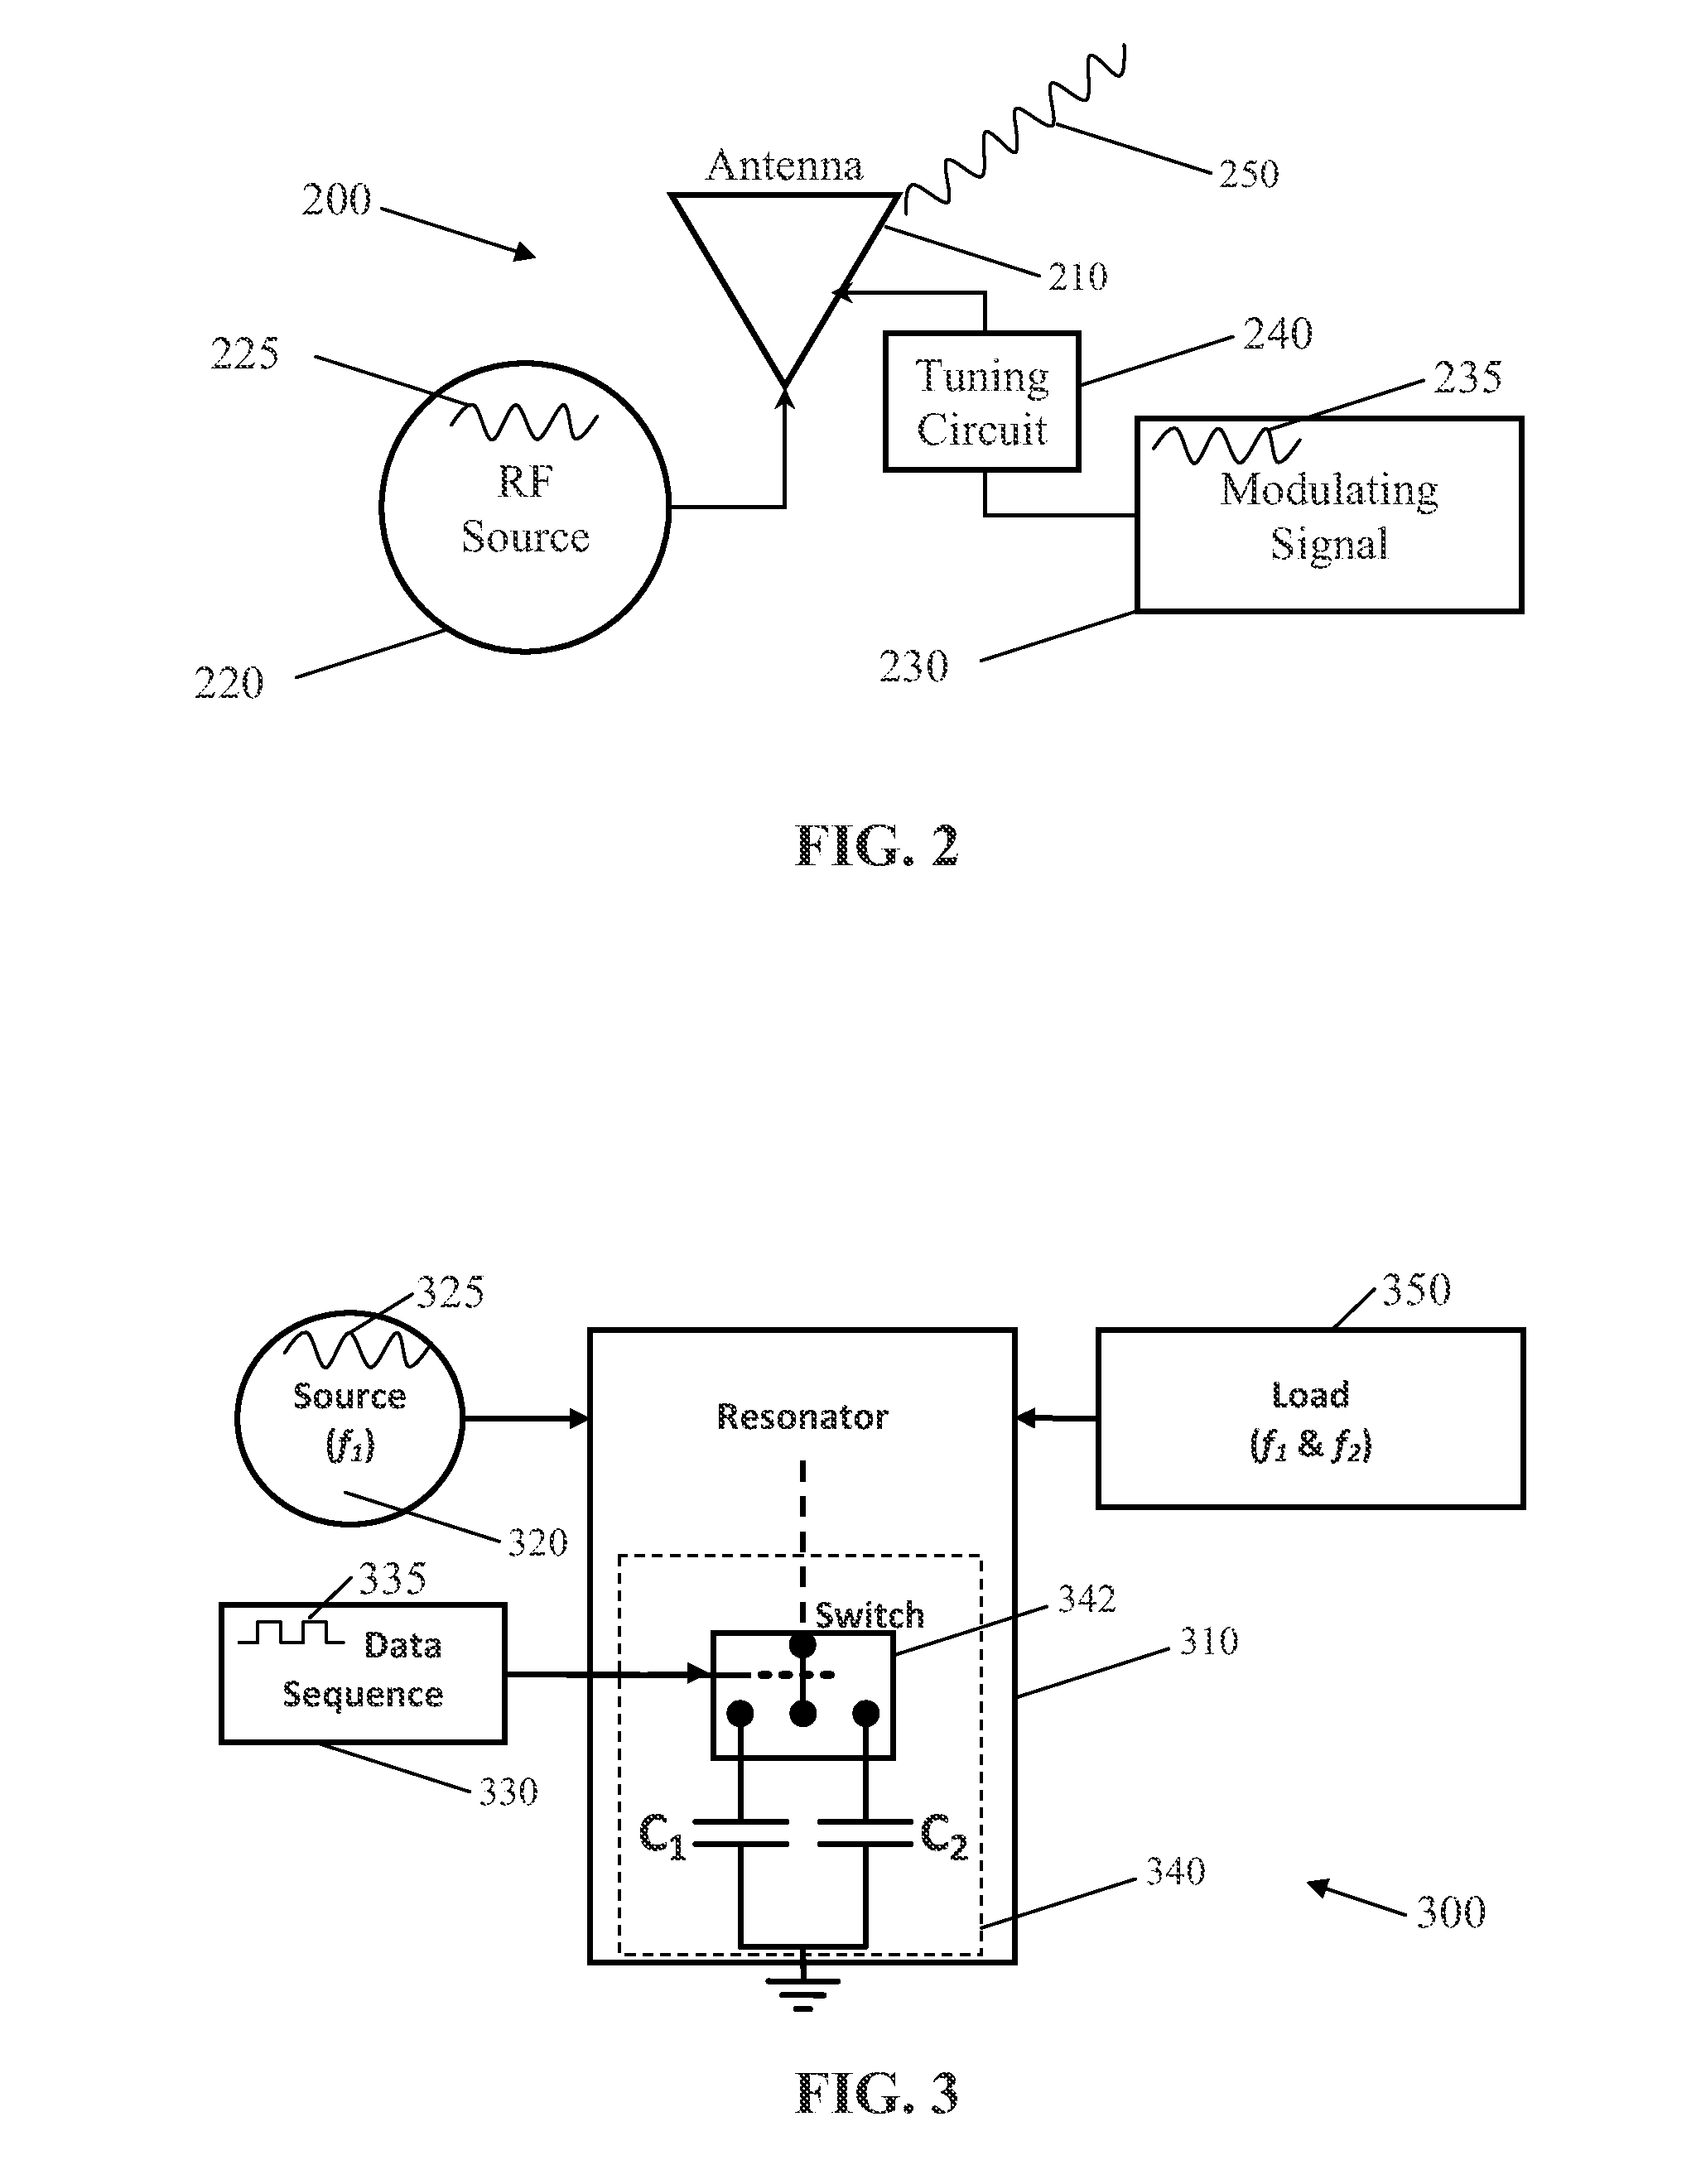 A time variant antenna for transmitting wideband signals